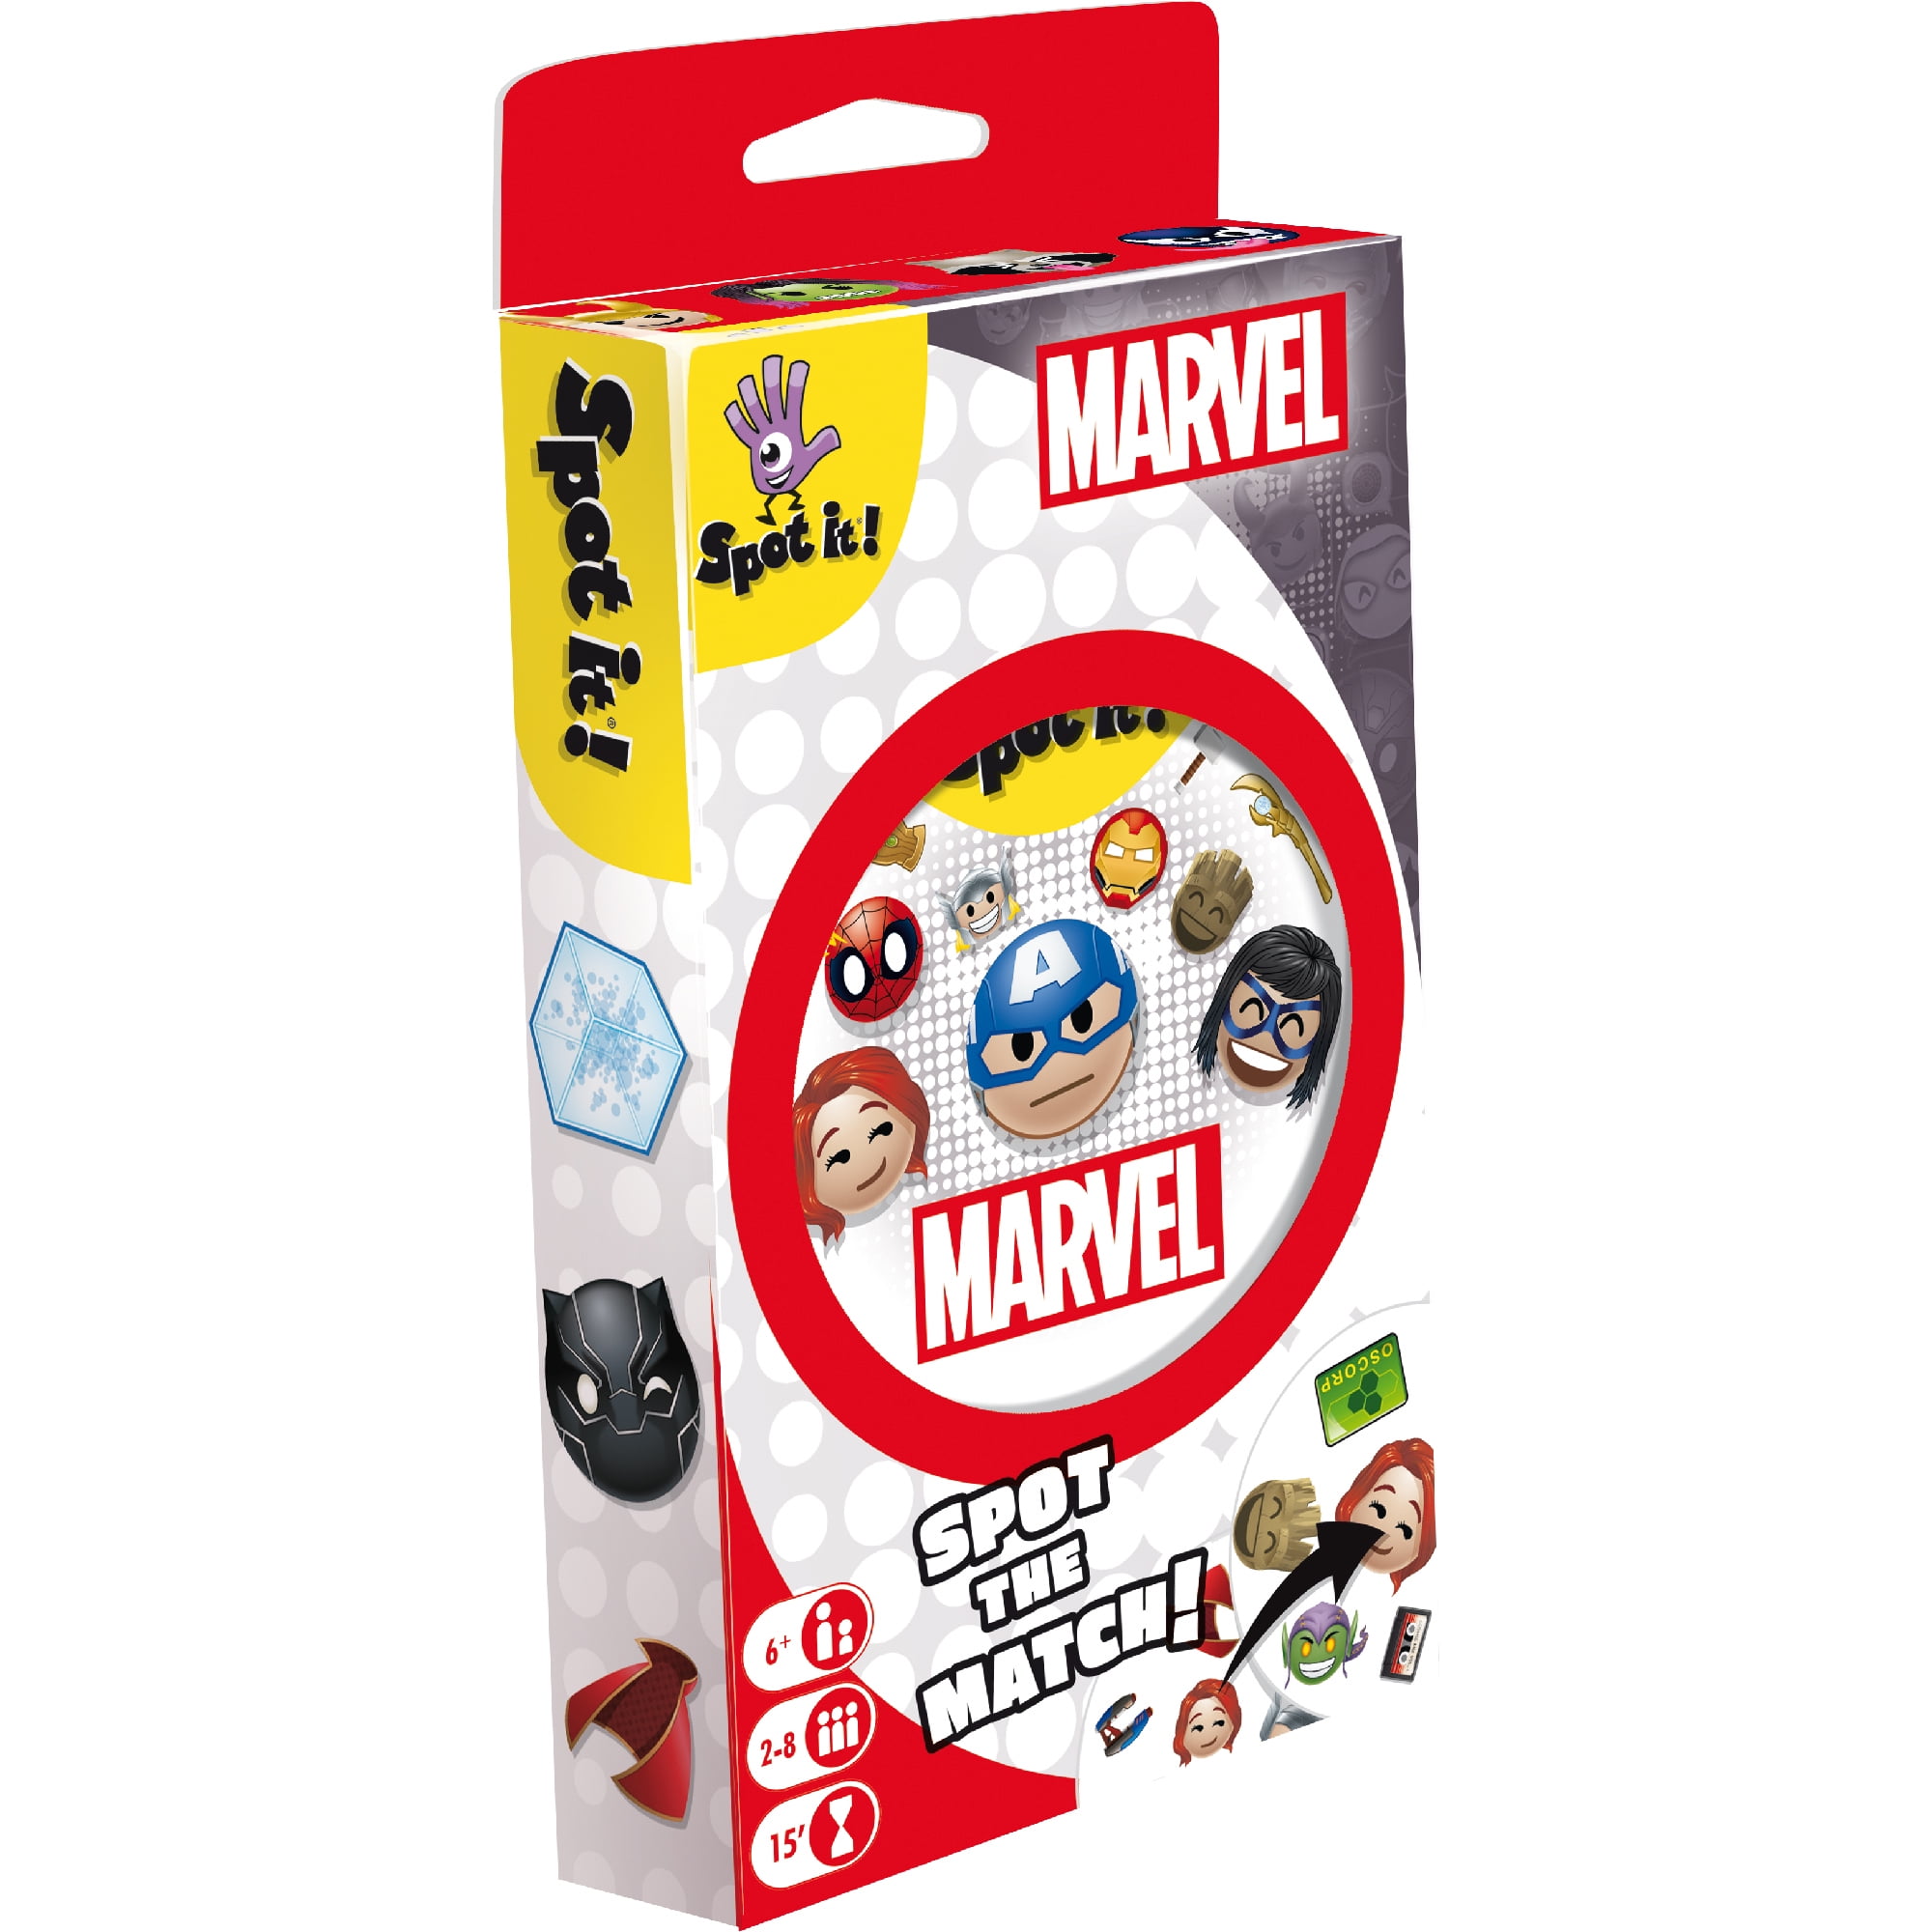 Zygomatic Spot It! Marvel Emojis - Marvel Super Heroes Family Card Game for  Superhero Fun! Fast-Paced Matching Game for Kids and Adults, Ages 6+, 2-8